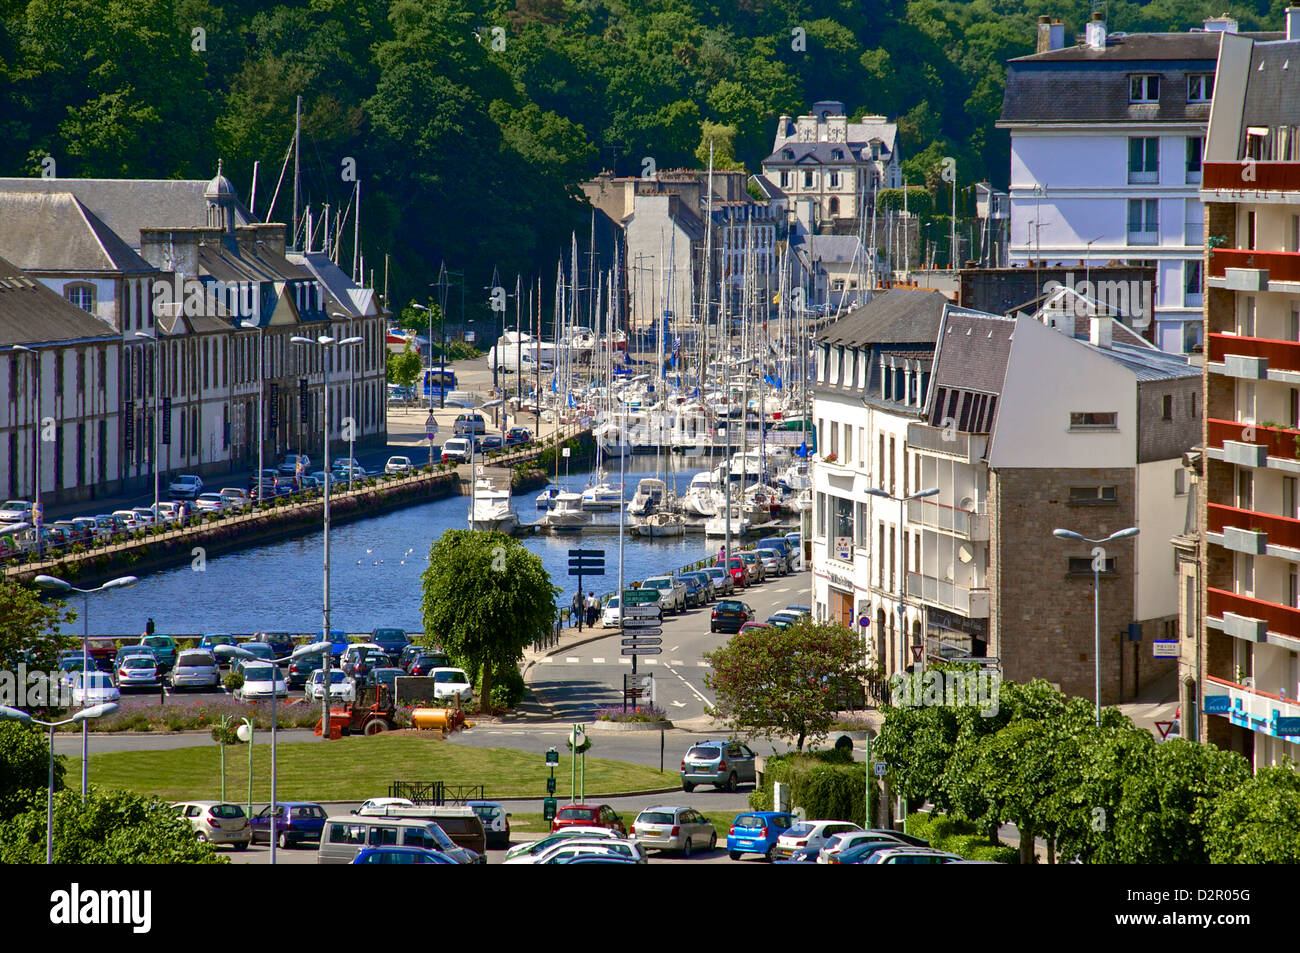 Harbour and basin, Down town, Morlaix, Finistere, Brittany, France, Europe Stock Photo